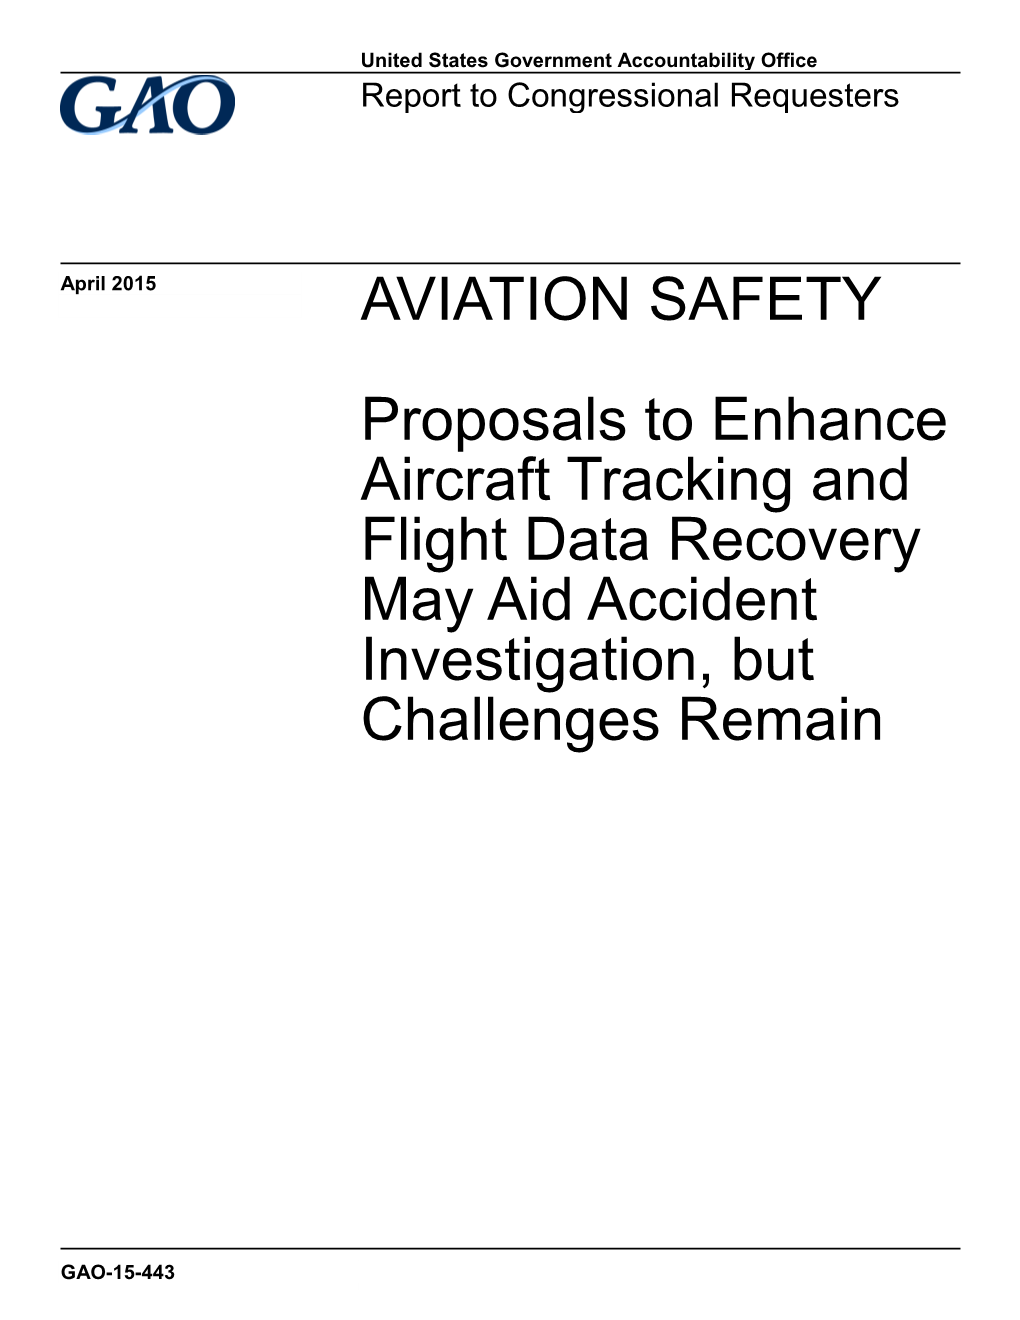 Proposals to Enhance Aircraft Tracking and Flight Data Recovery May Aid Accident Investigation, but Challenges Remain